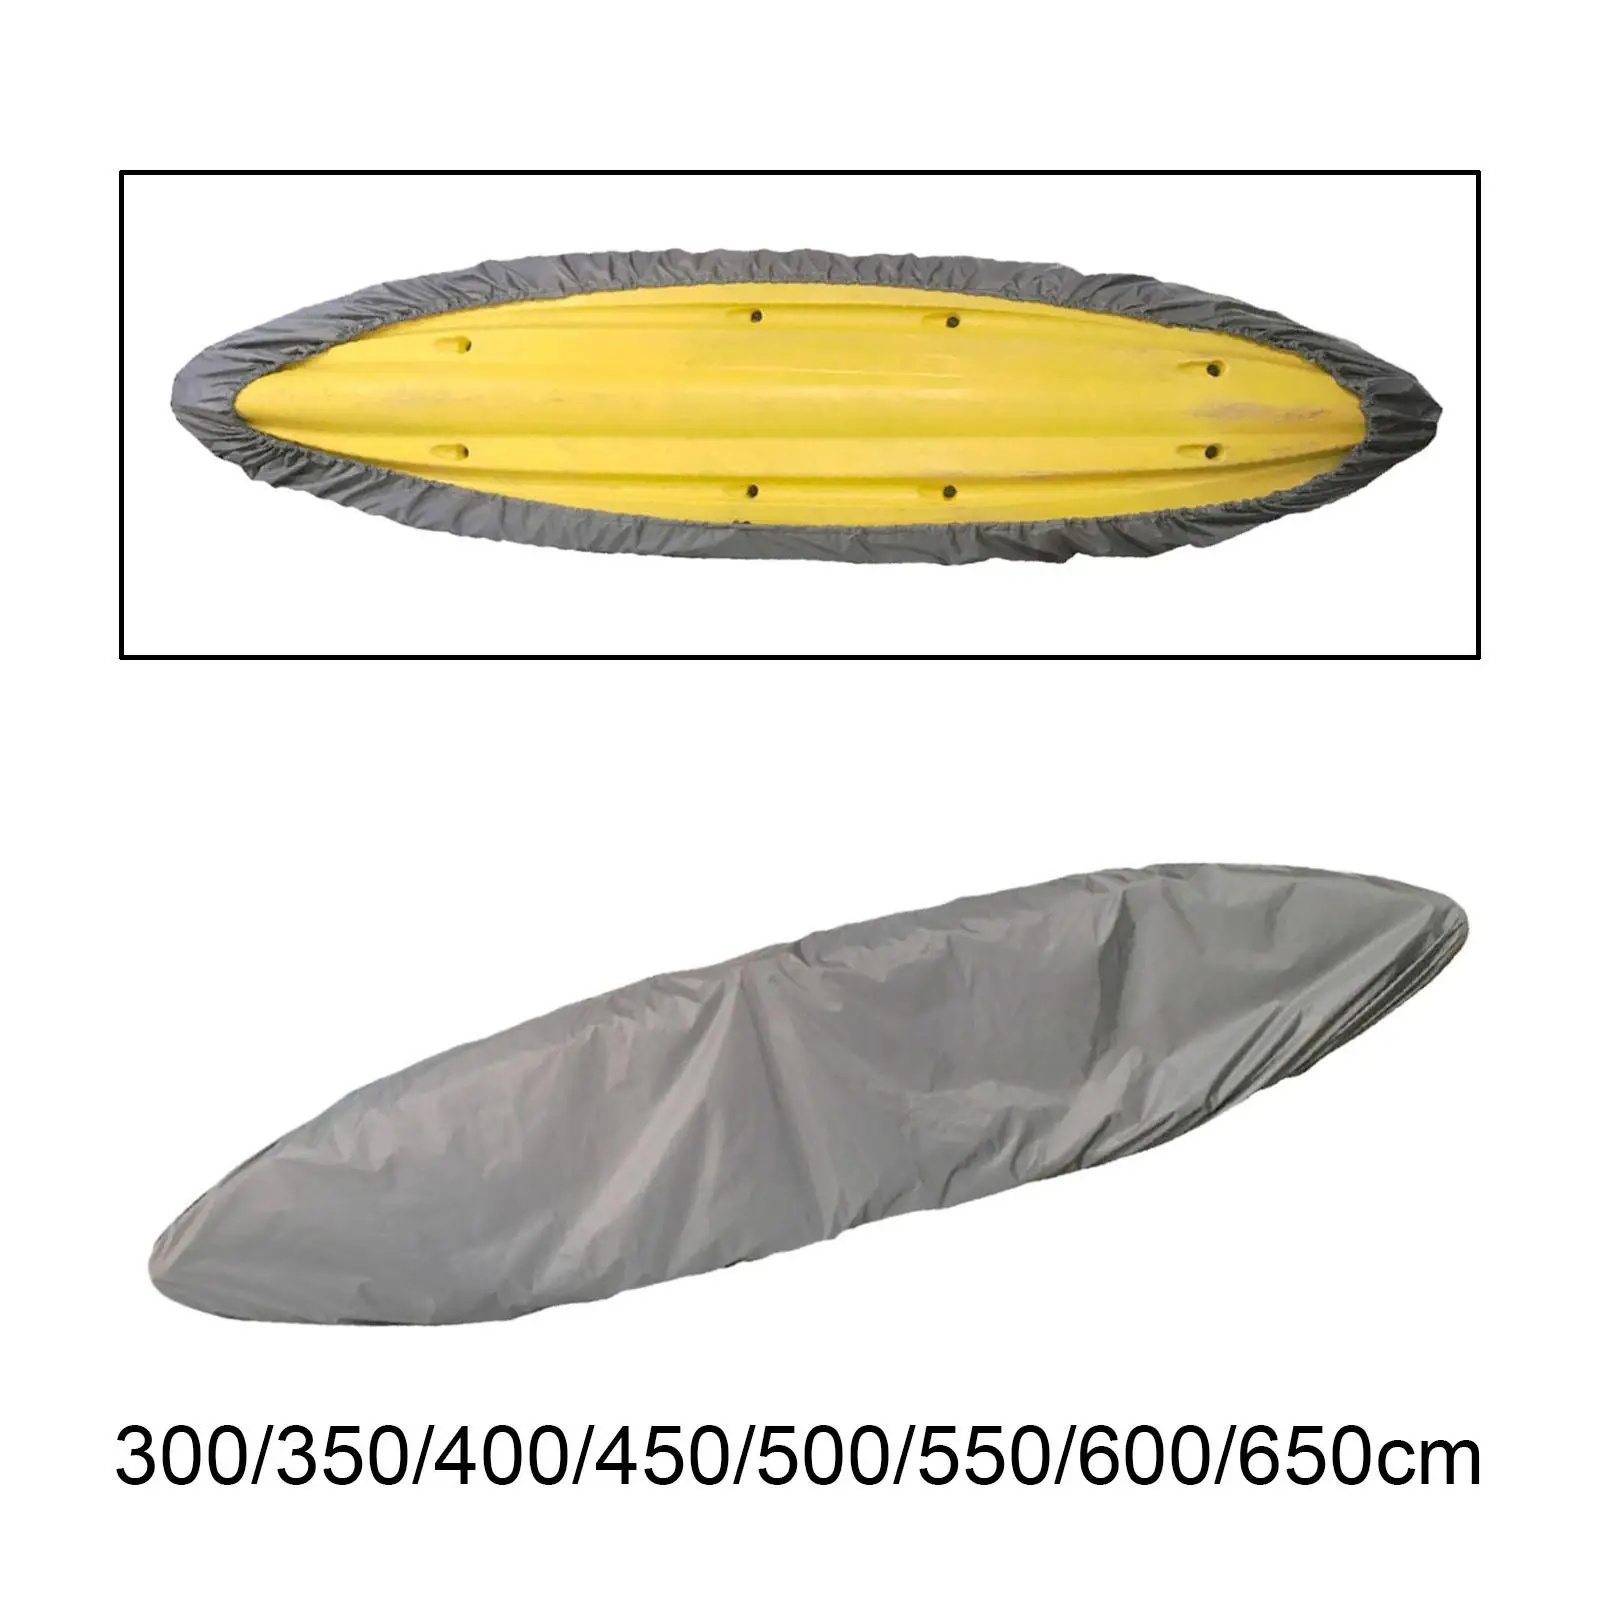 Canoe Cover Dustproof Transport Protector Boat Parts Boat Storage Cover